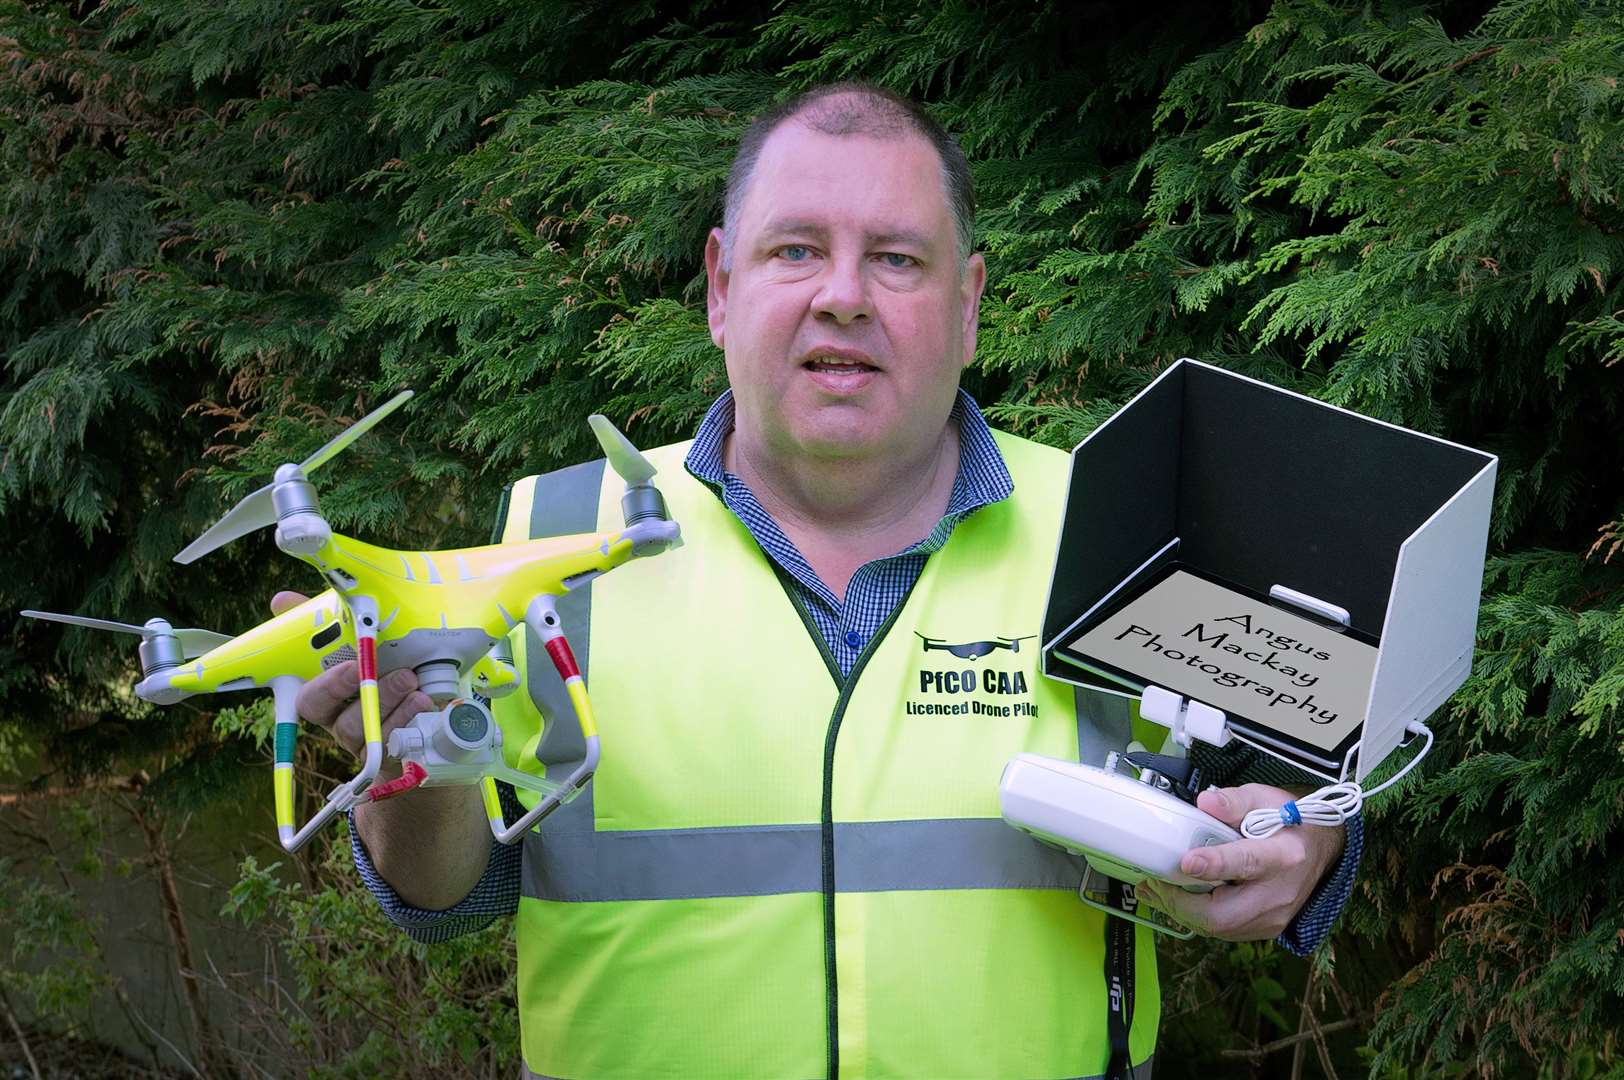 Angus Mackay now has permission to operate commercially with his drone.